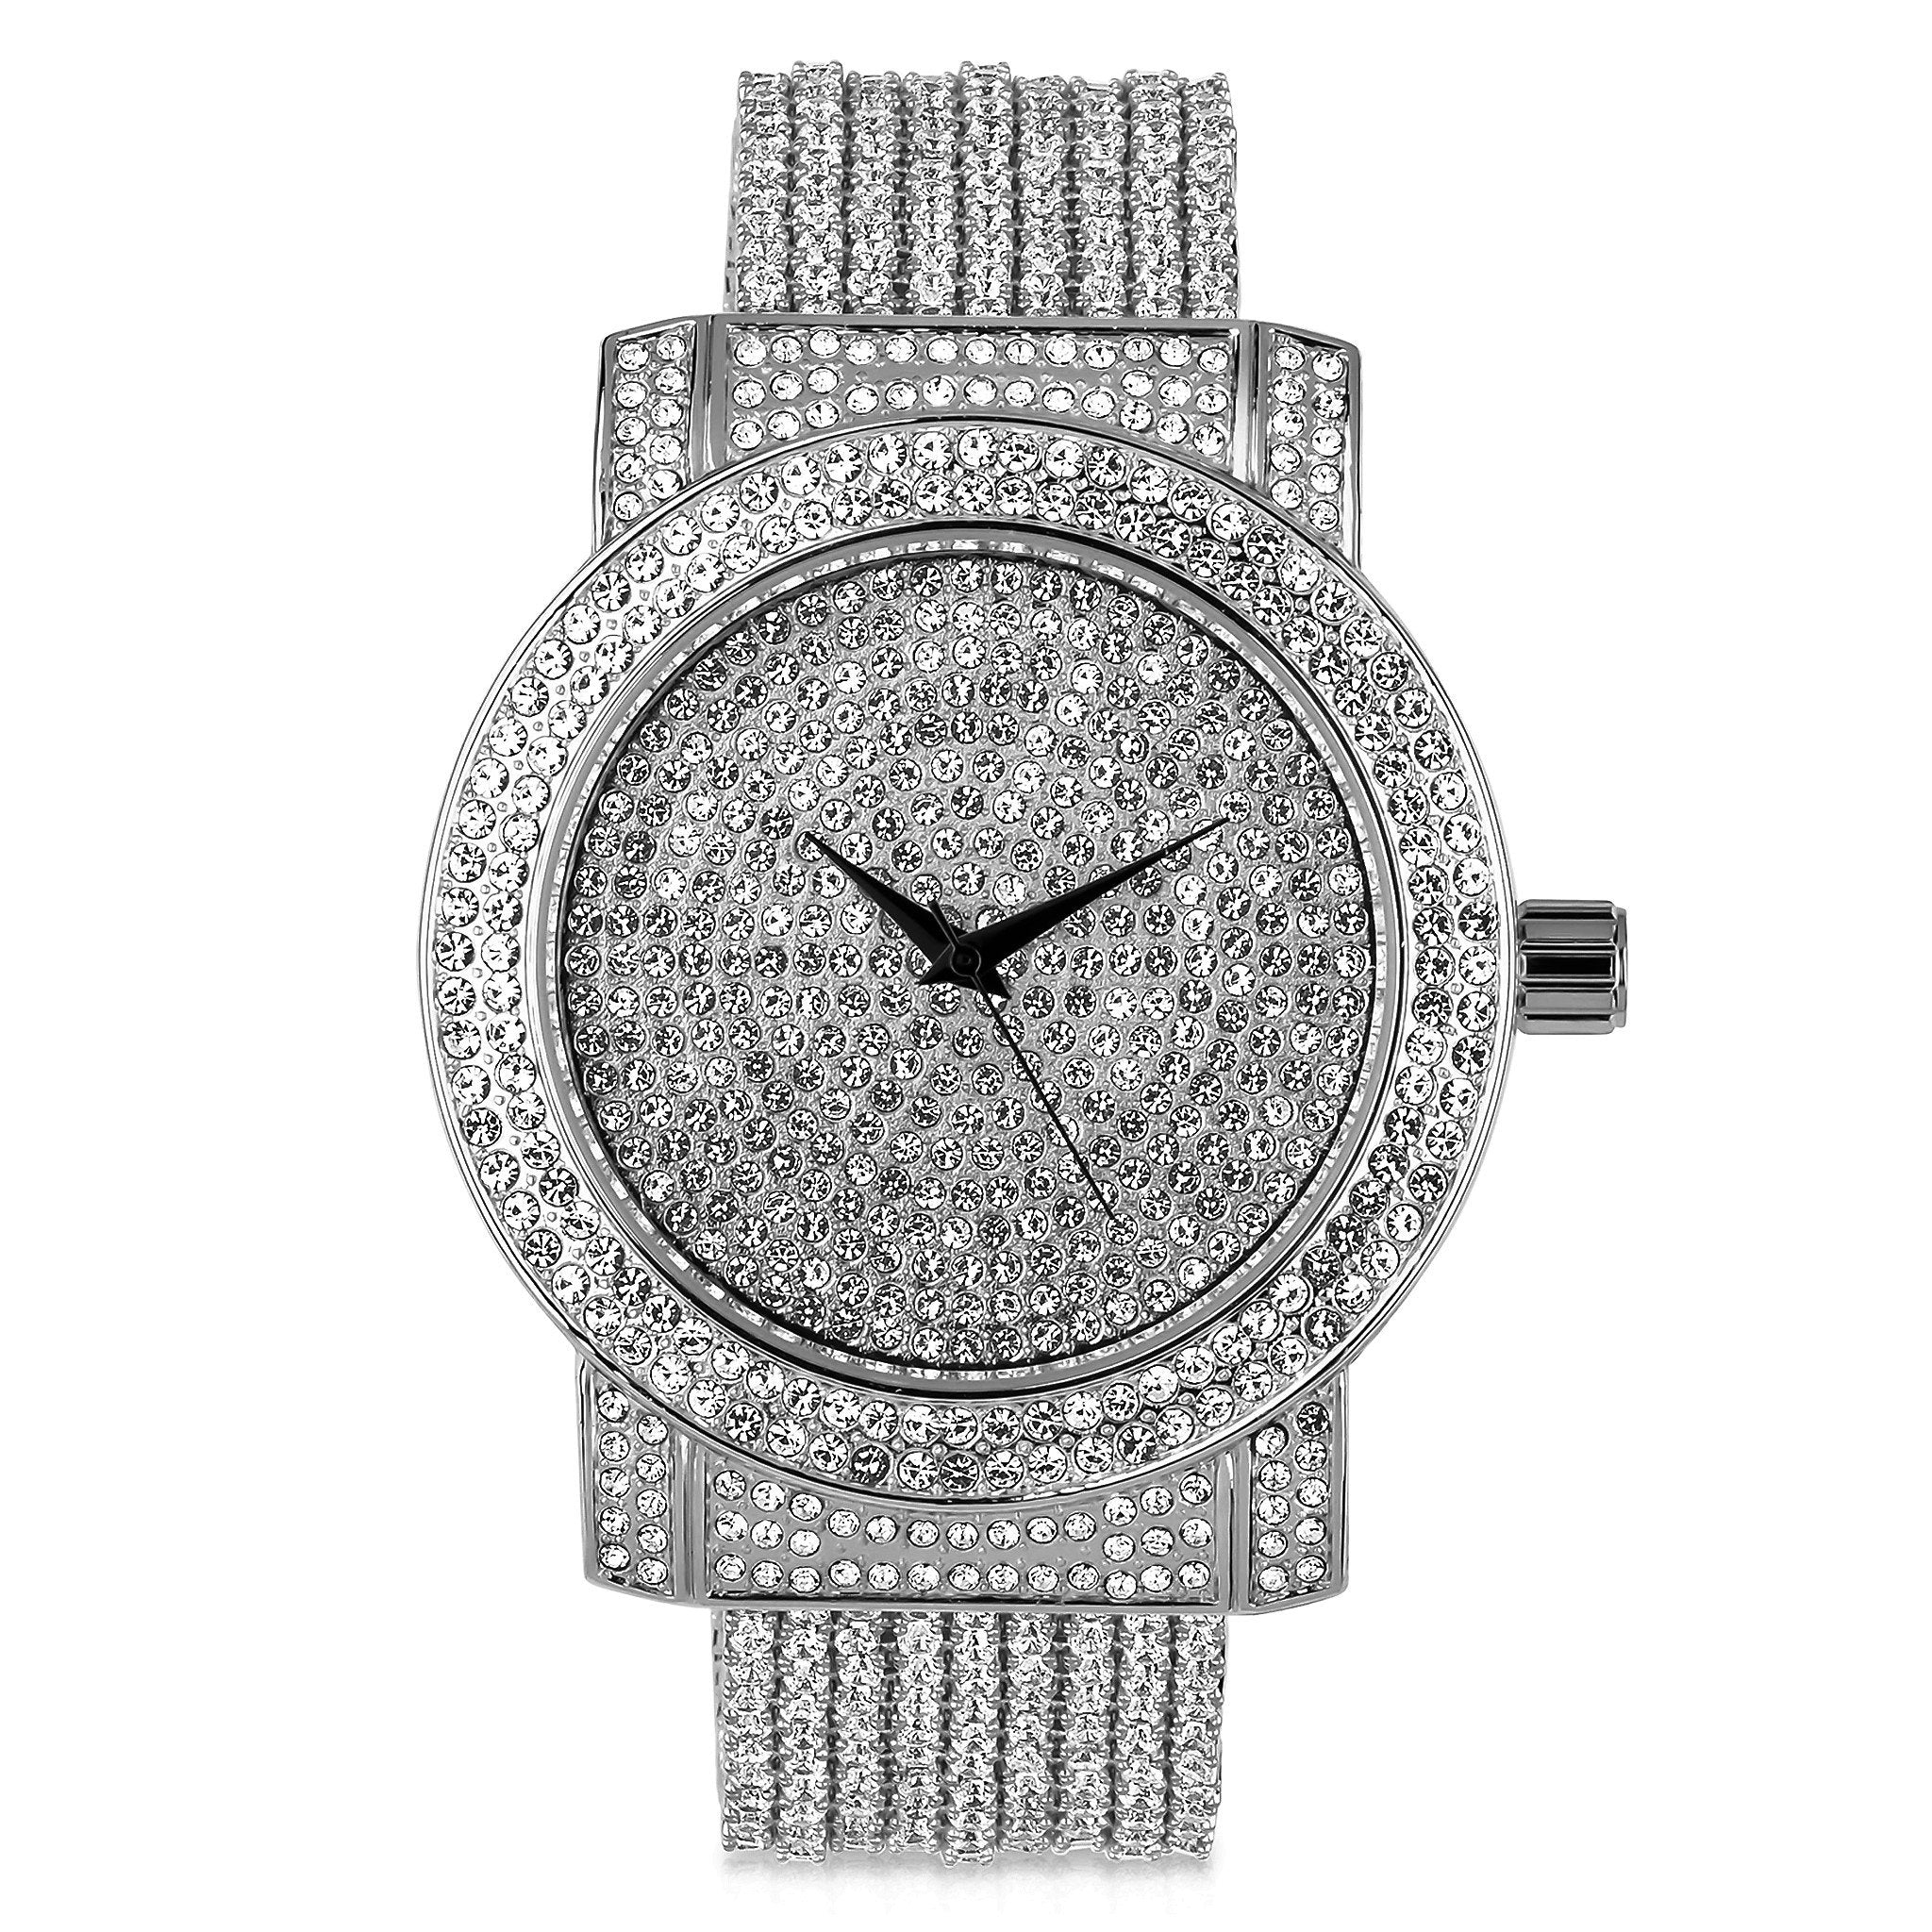 Beguiling CZ WATCH - 5110271